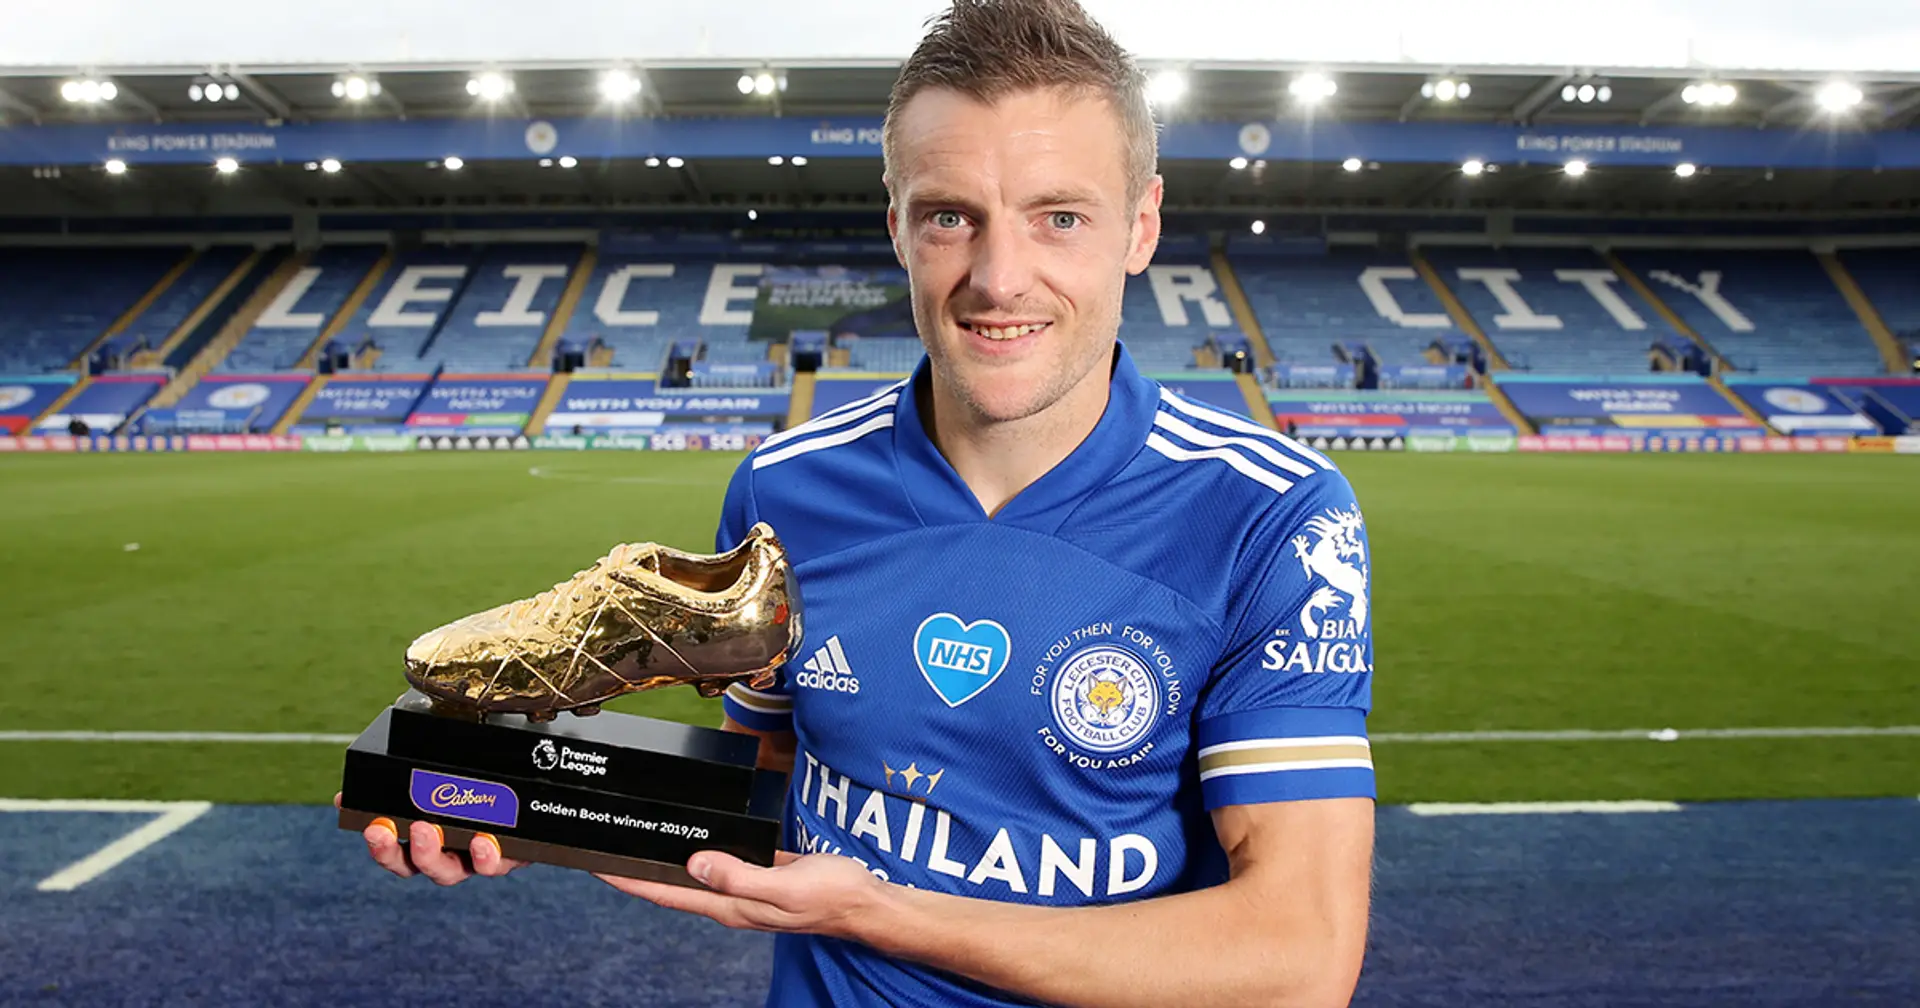 OFFICIAL: Leicester City captain Jamie Vardy wins first EPL Golden Boot ever